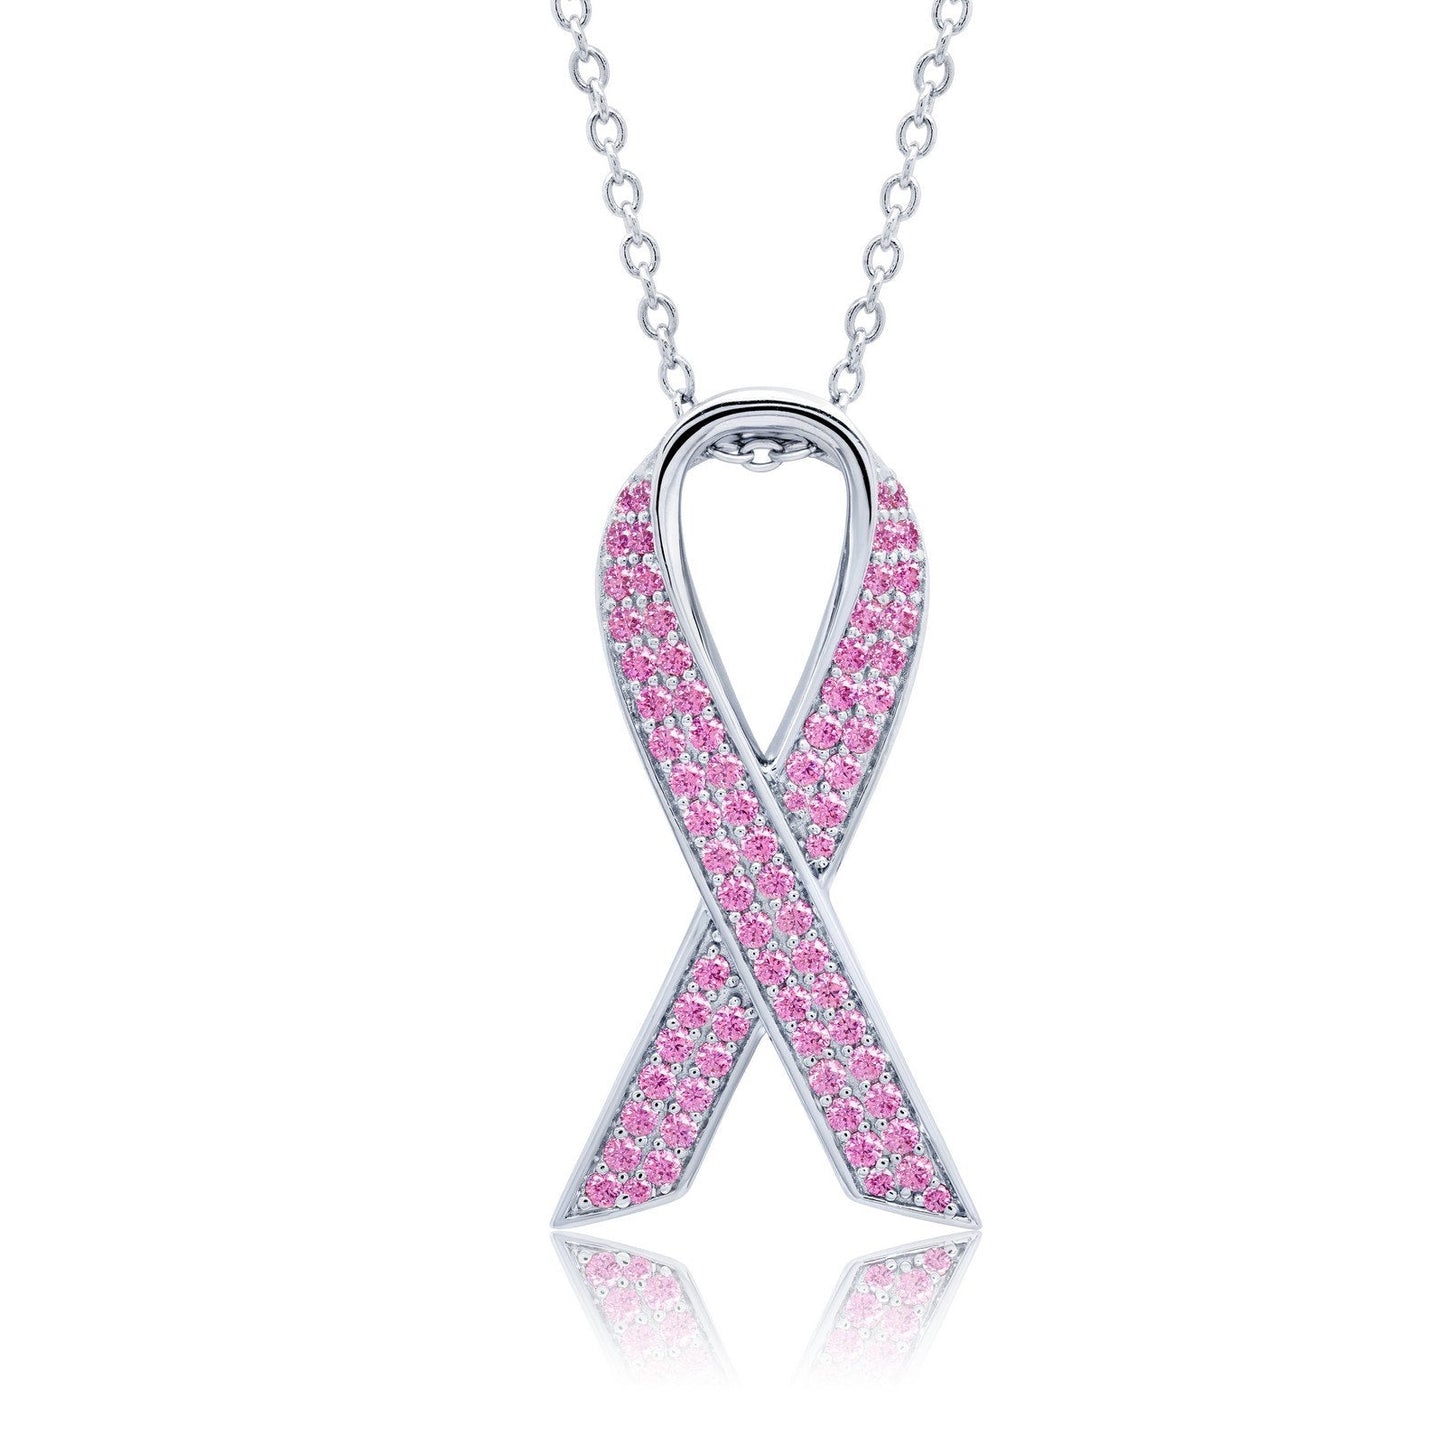 Load image into Gallery viewer, Lafonn Pave Pink Ribbon Necklace Simulated Diamond NECKLACES Platinum 0.85 CTS Approx. 29.8mm (W) x 11.5mm (H)
